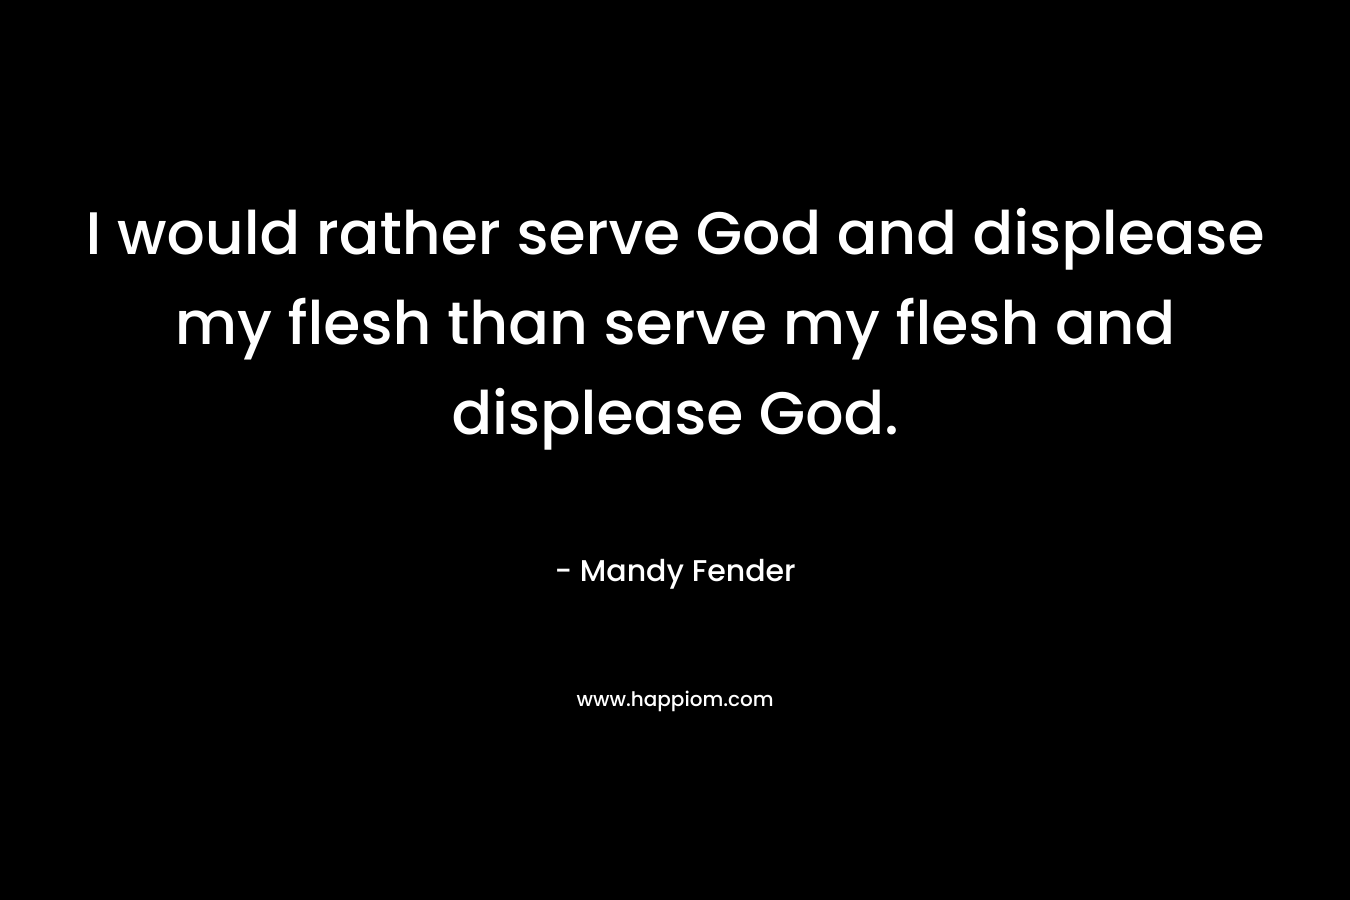 I would rather serve God and displease my flesh than serve my flesh and displease God. – Mandy Fender